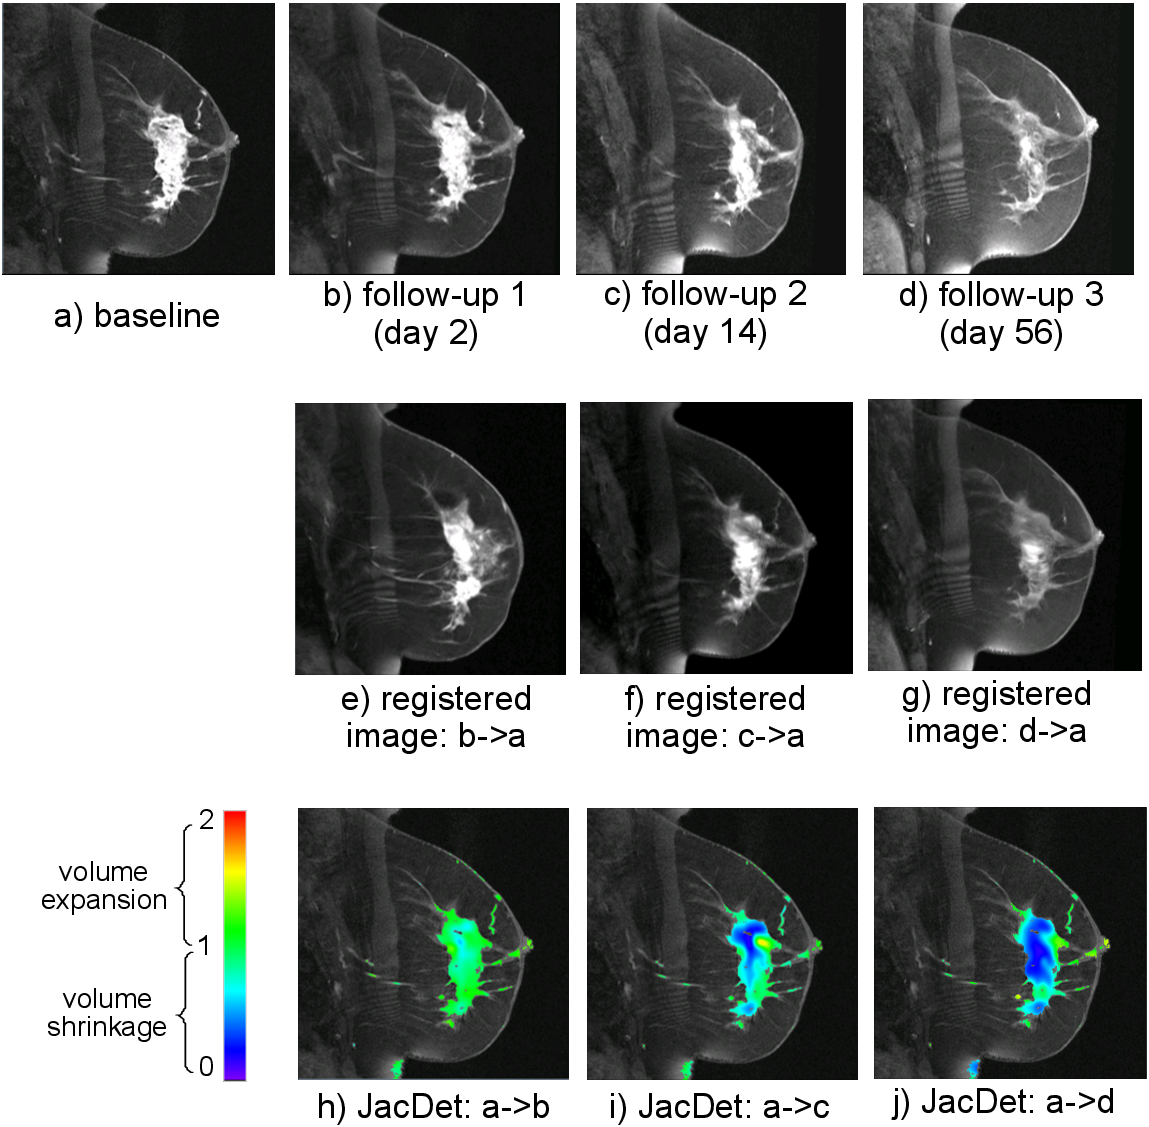 Quantification of the longitudinal cancer of a breast cancer patient, by the Jacobian Determinant maps derived from the DRAMMS-computed deformation.